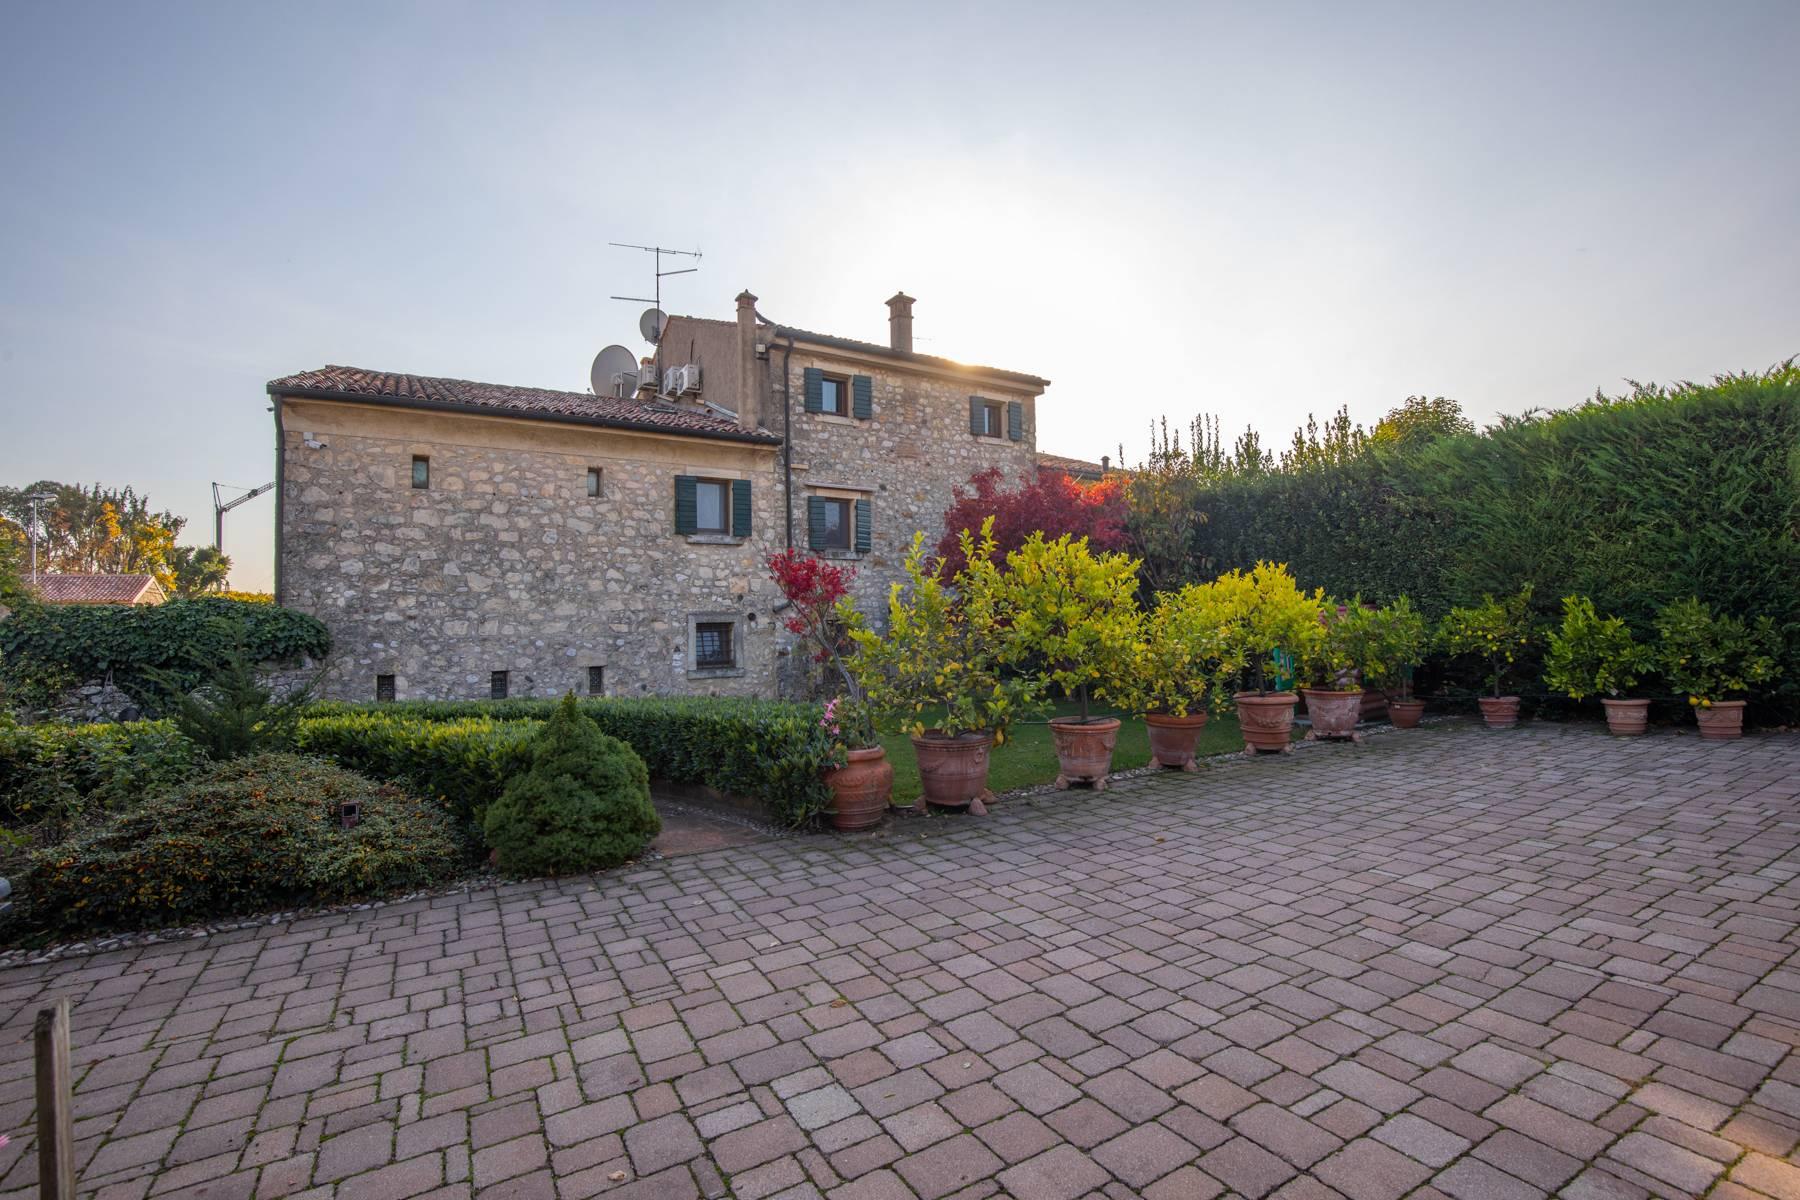 Stunning farmhouse surrounded by vineyards in the Valpolicella area - 1